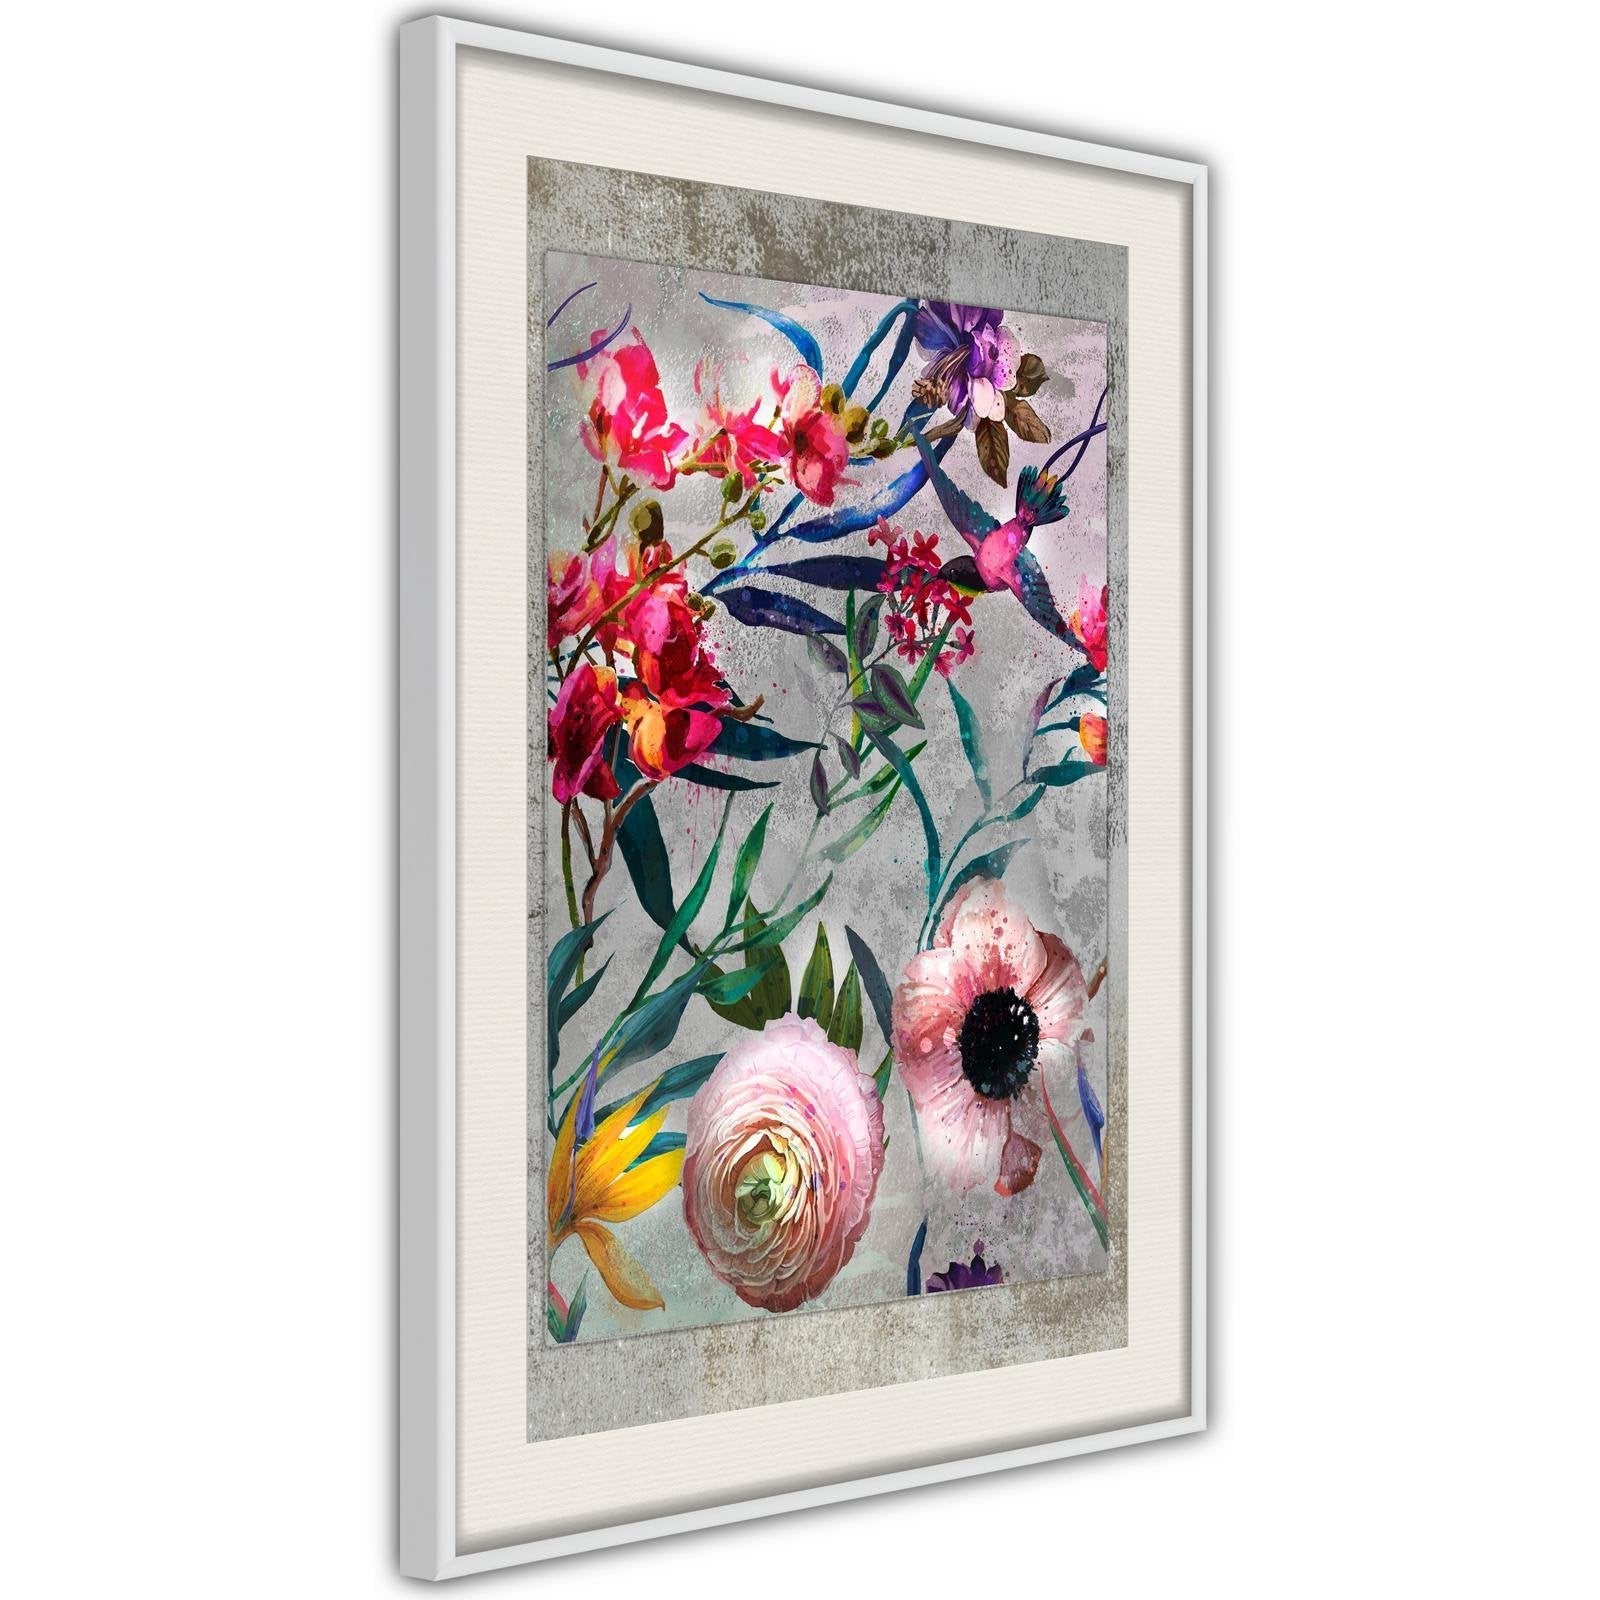 Inramad Poster / Tavla - Scattered Flowers-Poster Inramad-Artgeist-peaceofhome.se